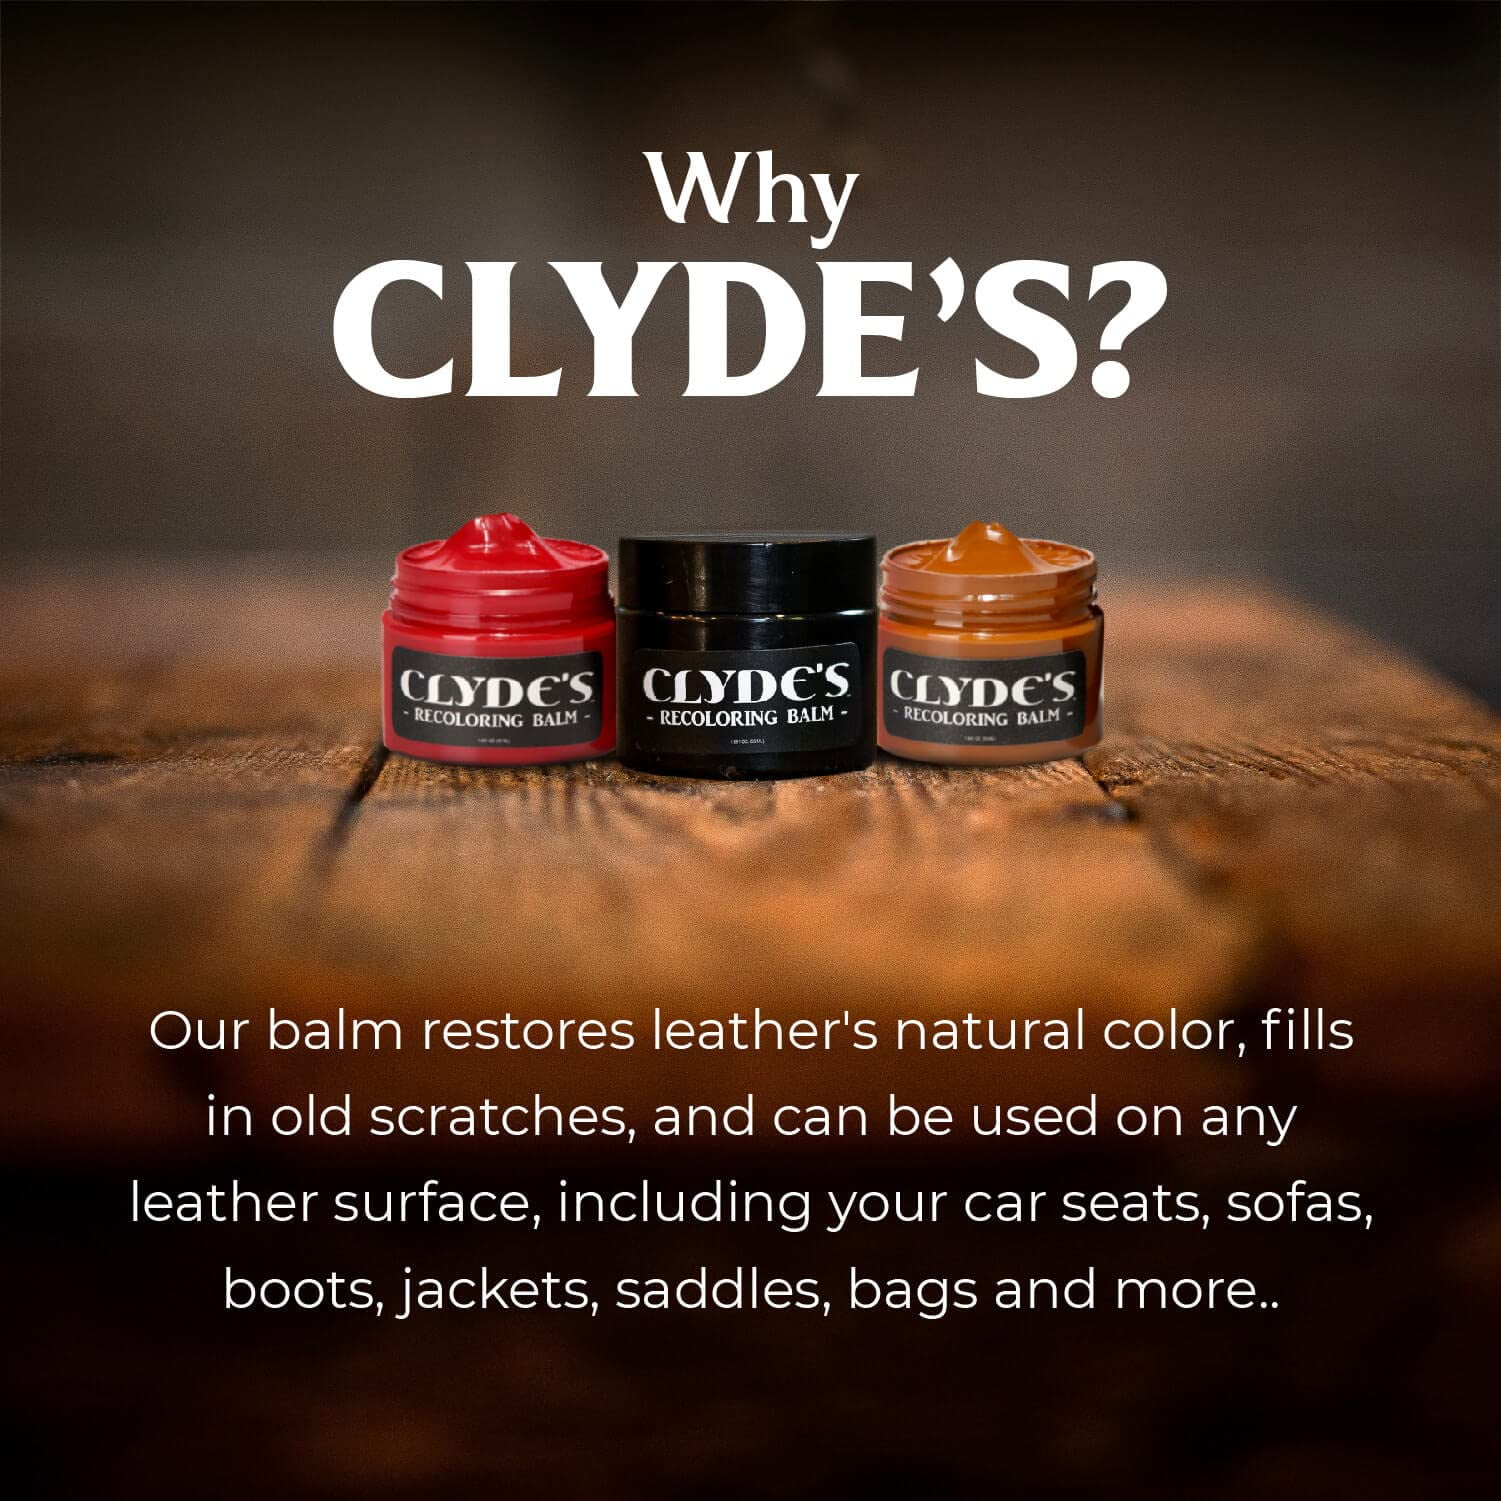 😱 TODAY ONLY: Recoloring Balm for $1 ONLY 😱 - Clyde's Leather Company